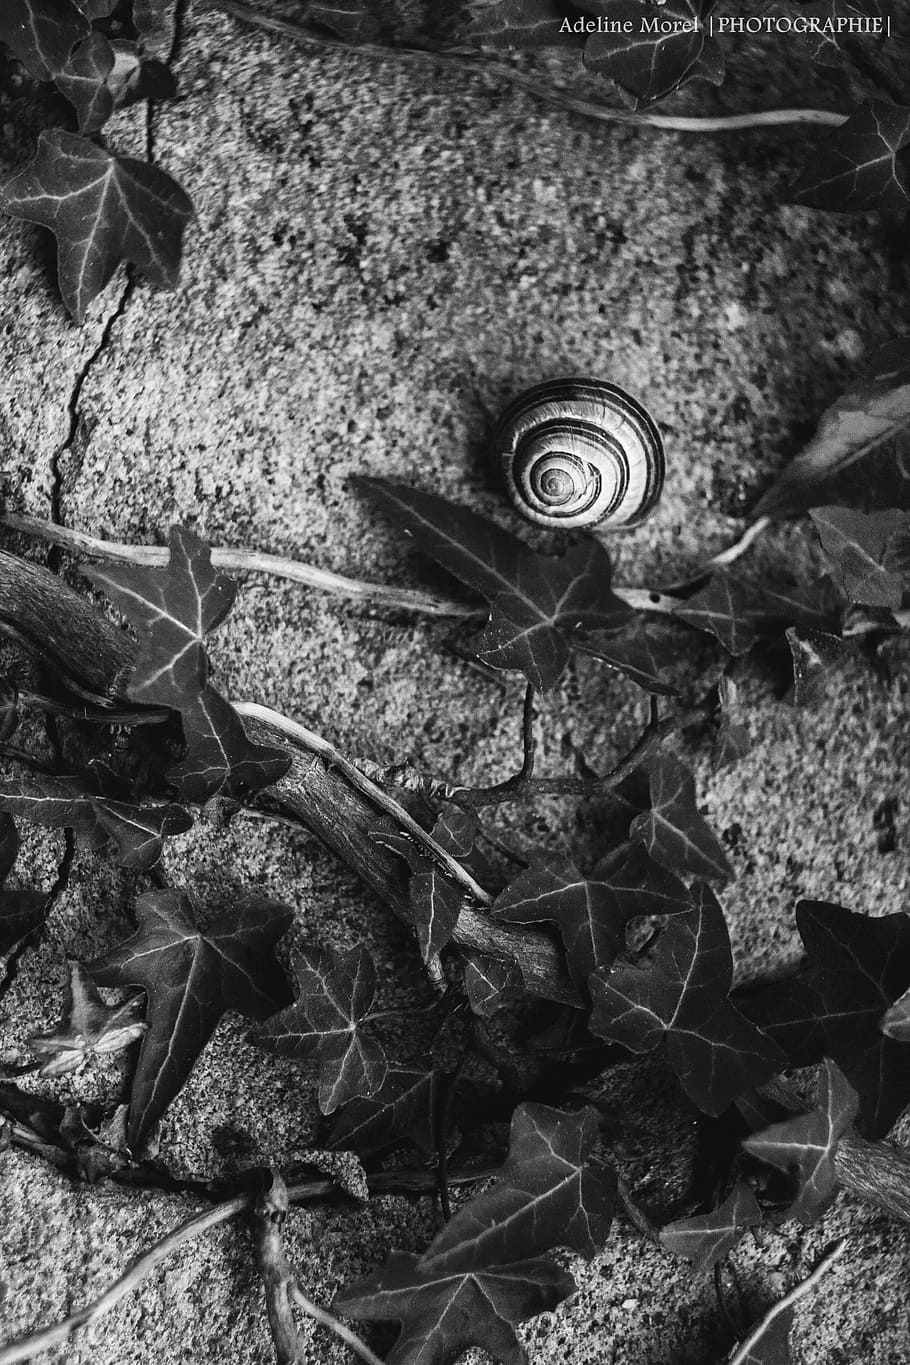 Snail, Ivy, Wall, Black And White, leaf, nature, gastropod, one animal, plant part, plant